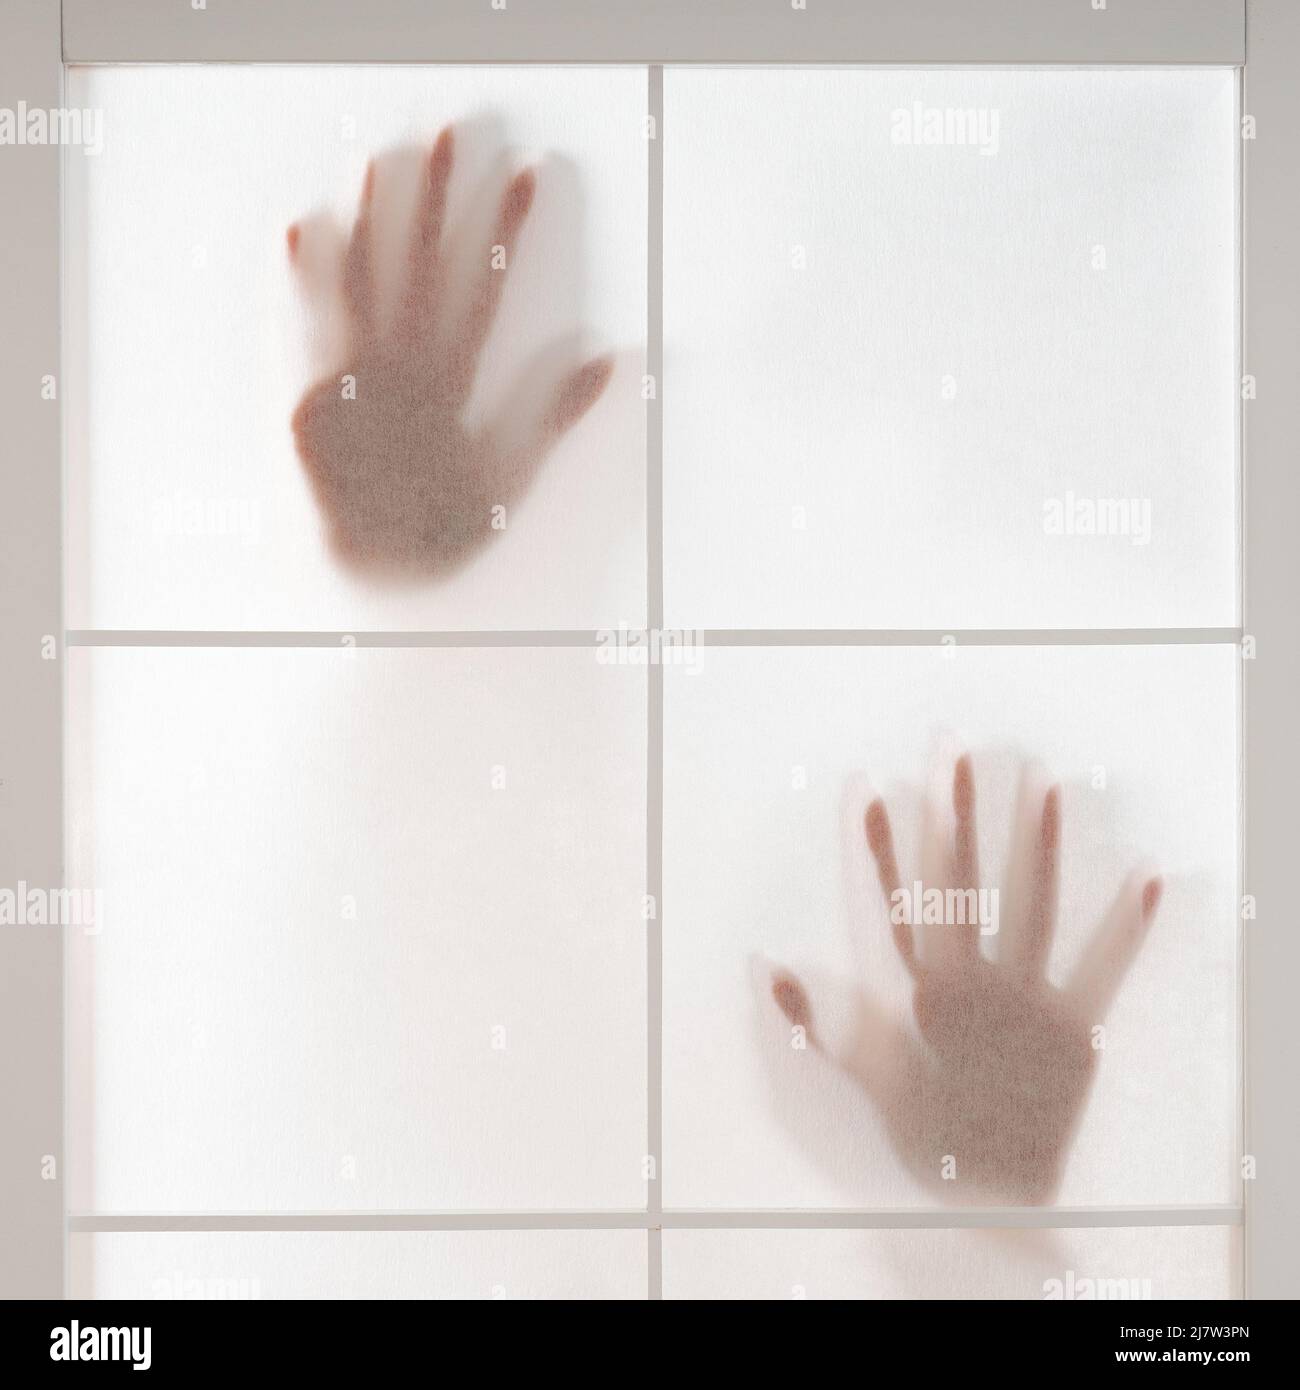 silhouette of hands trapped behind translucent screen Stock Photo